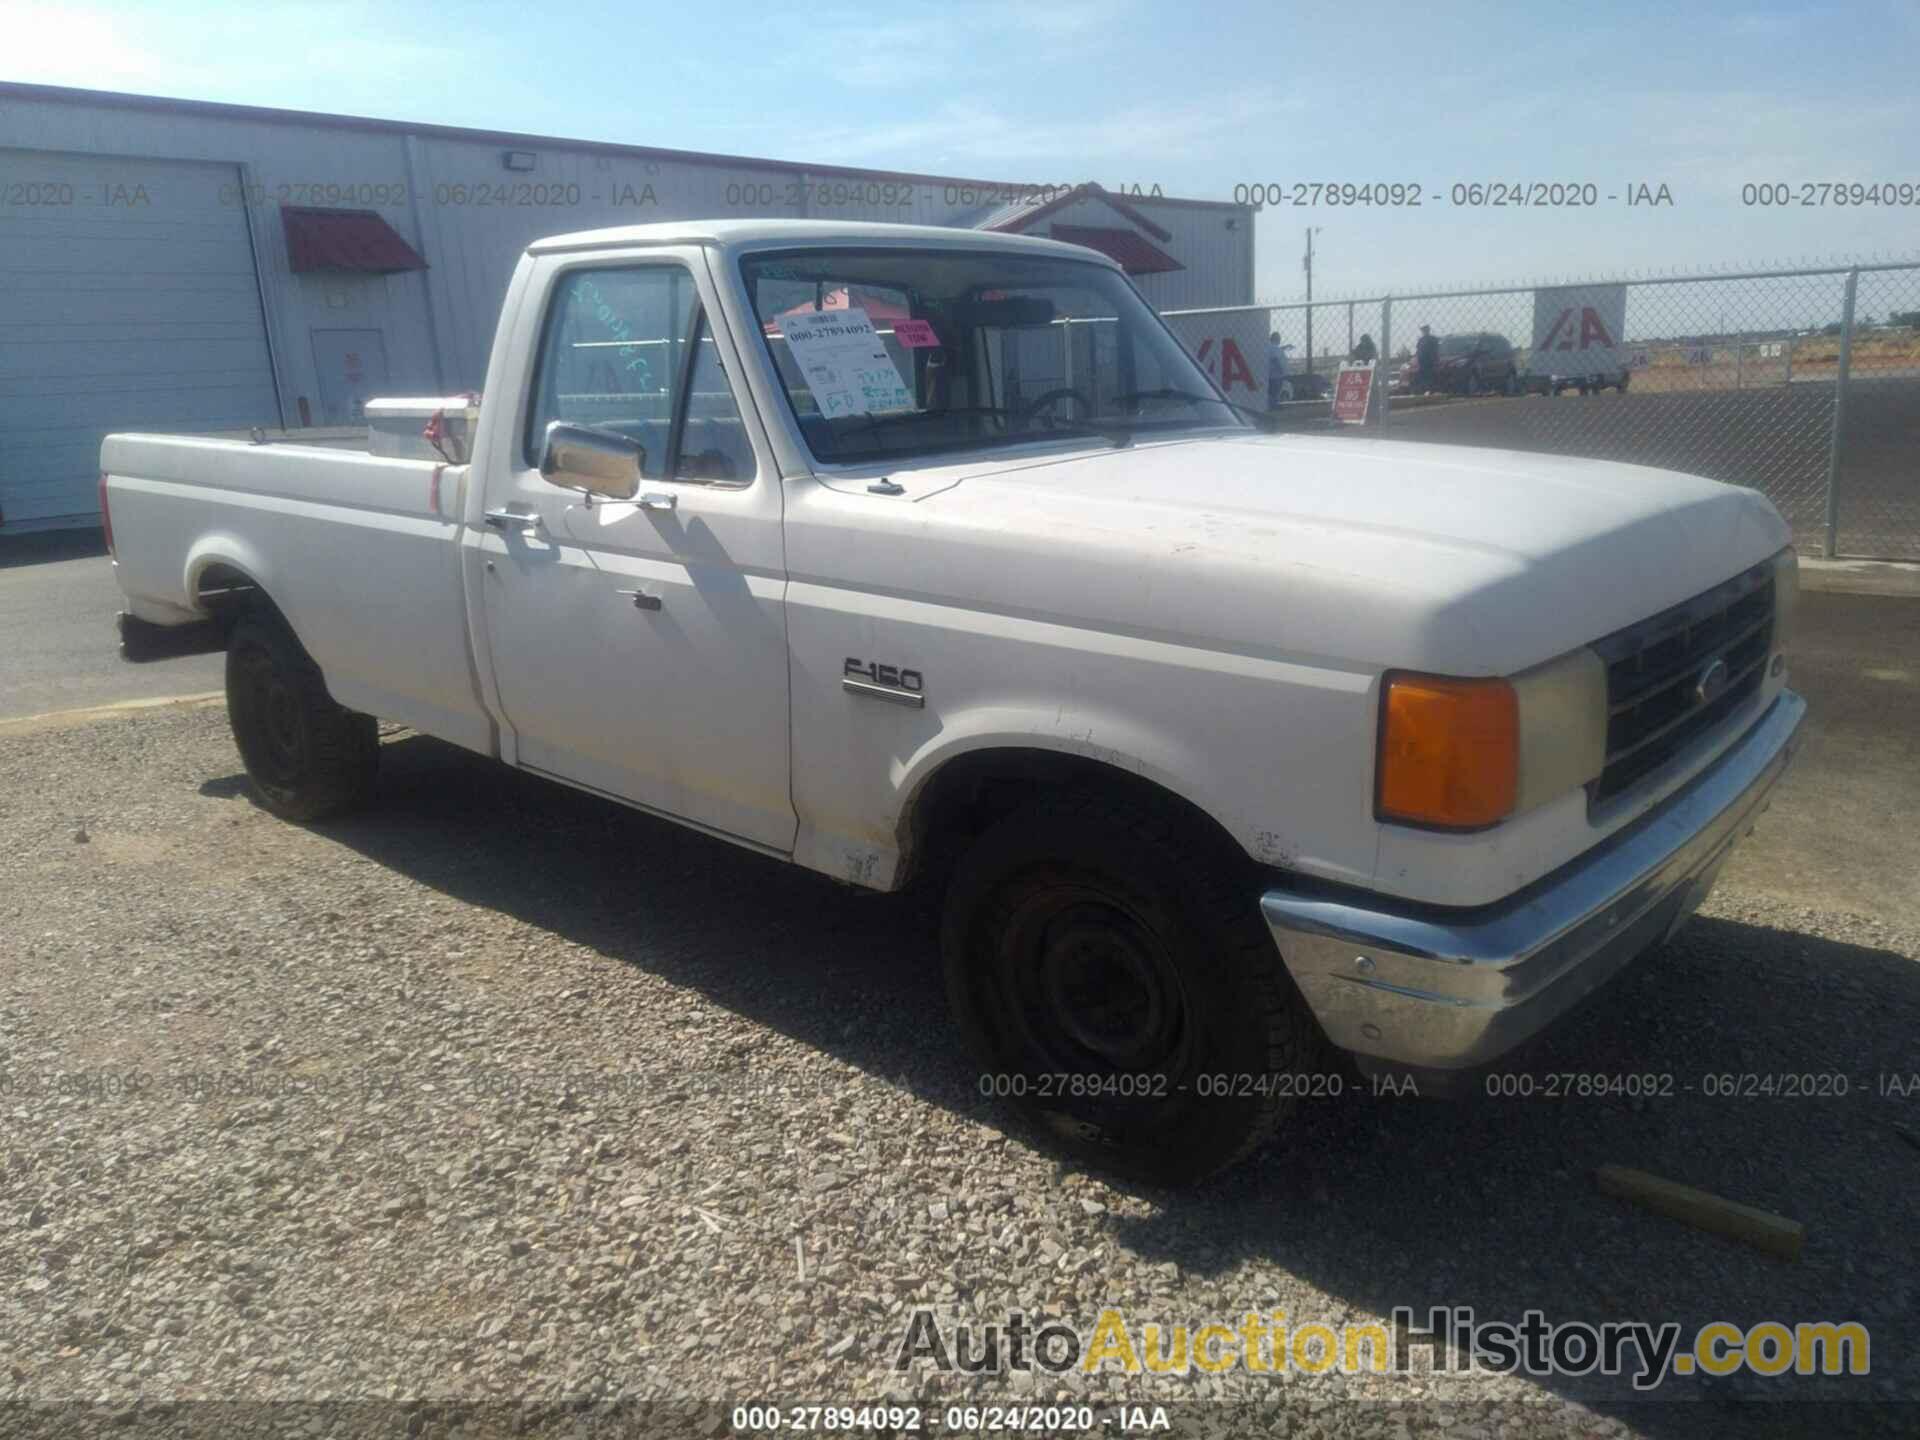 Ford F150, 1FTCF15N9HLA13247